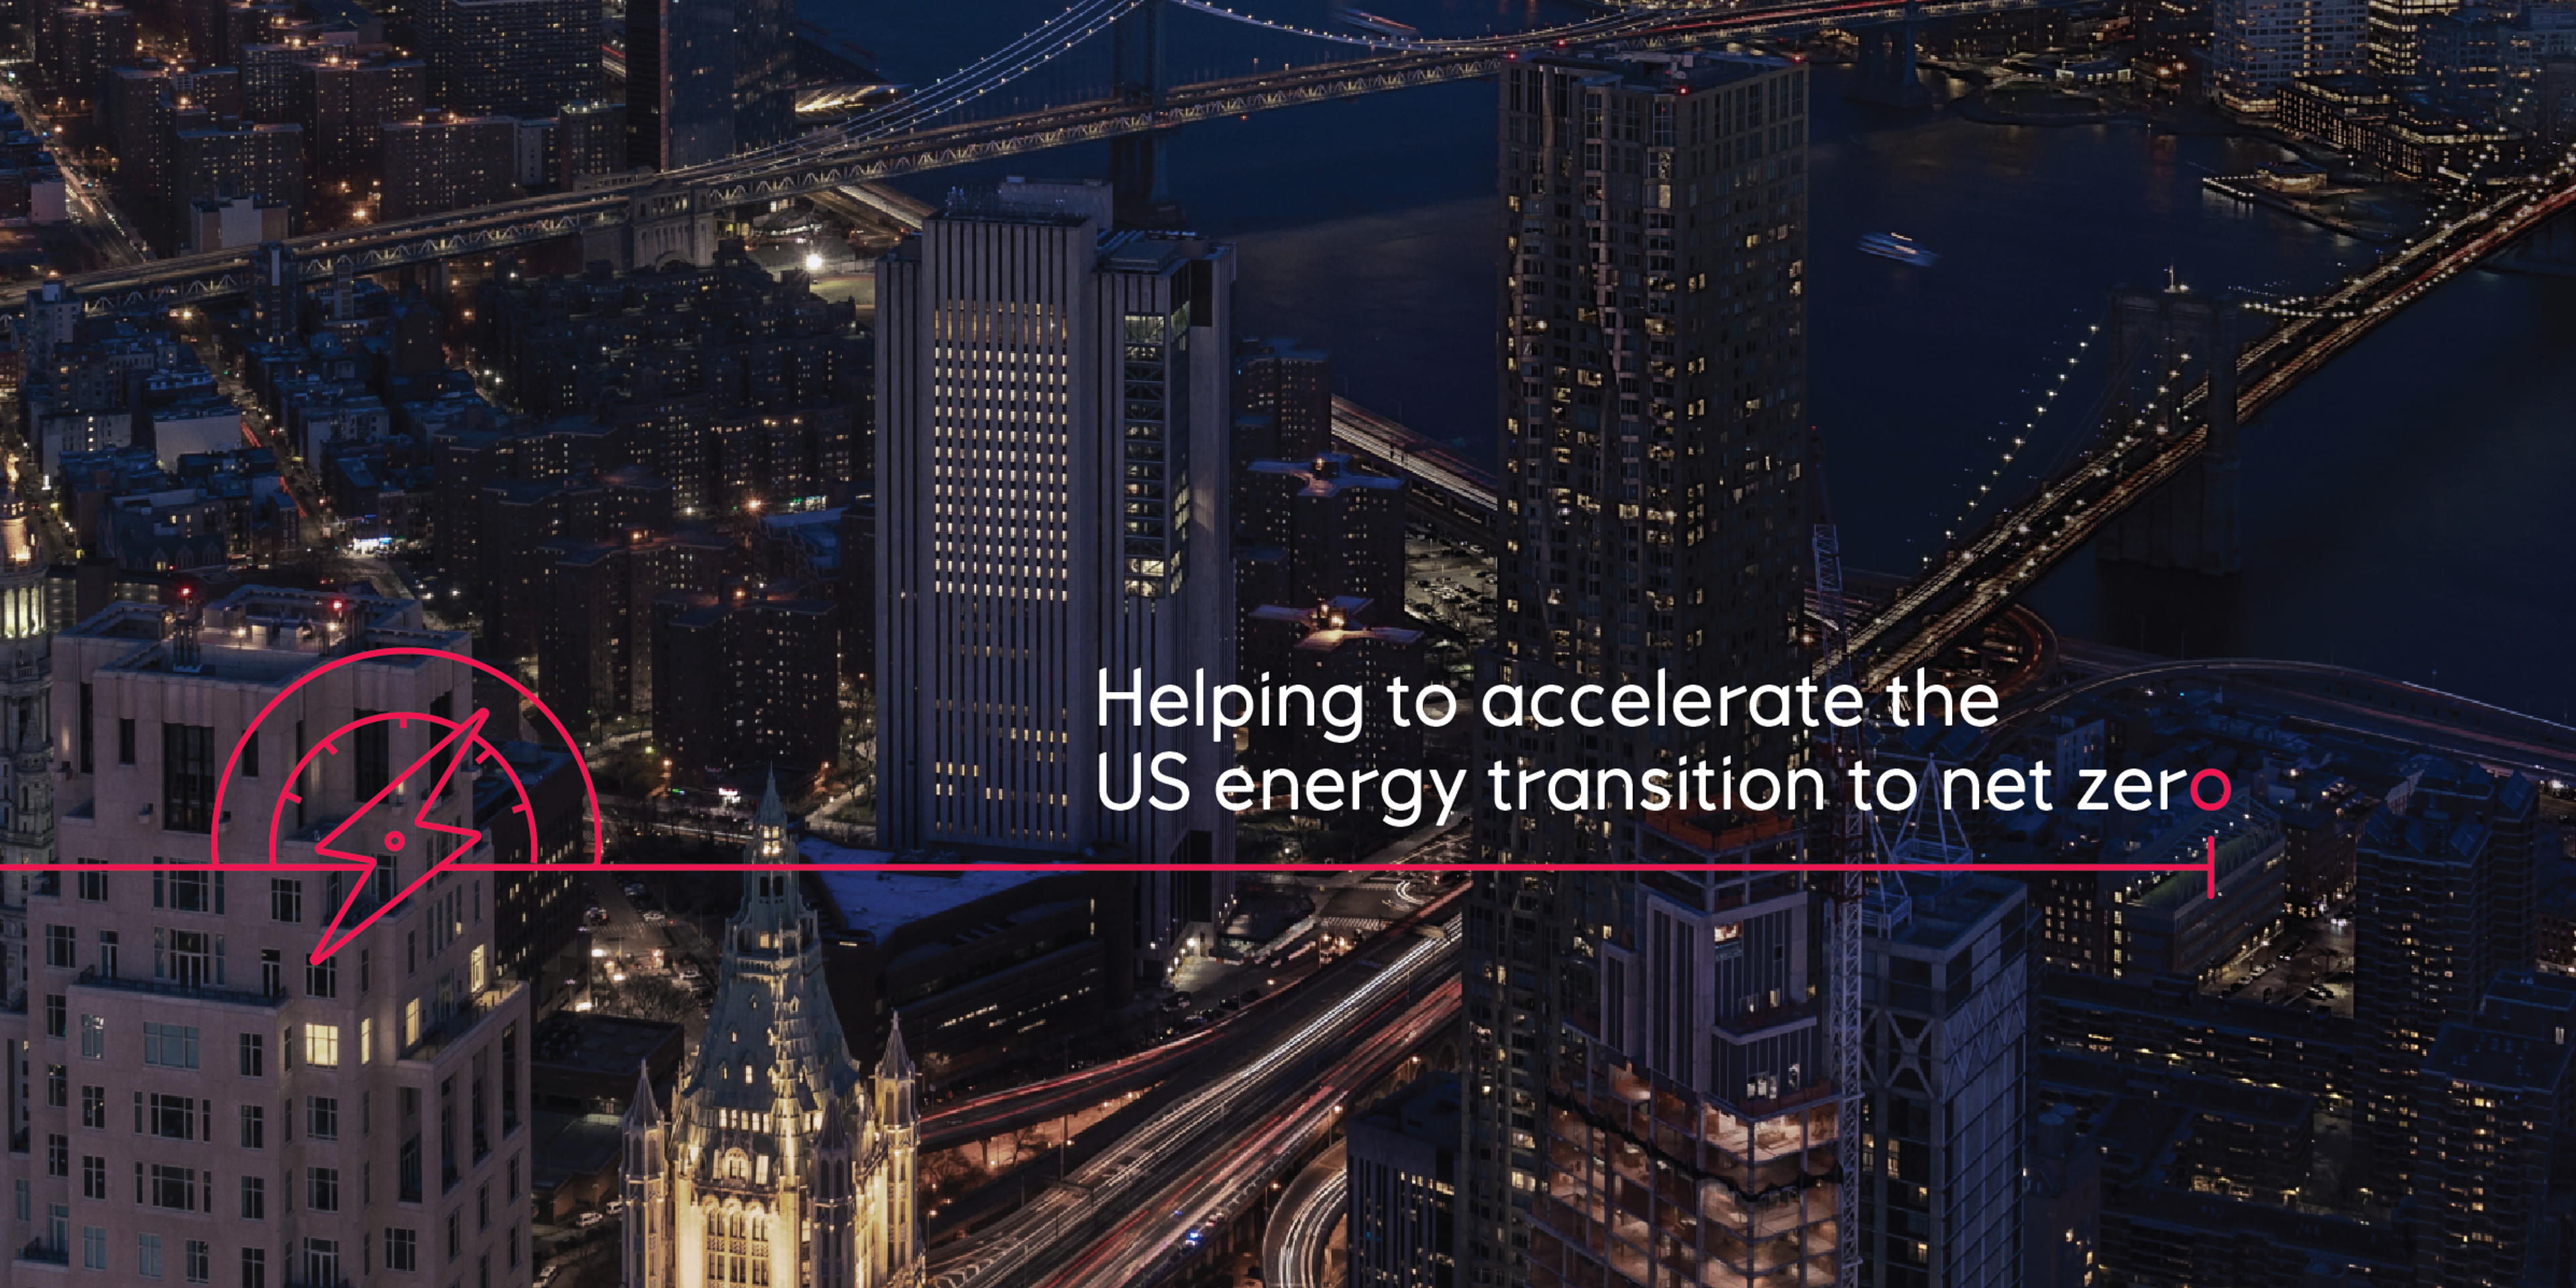 Helping to accelerate the US energy transition to net zero